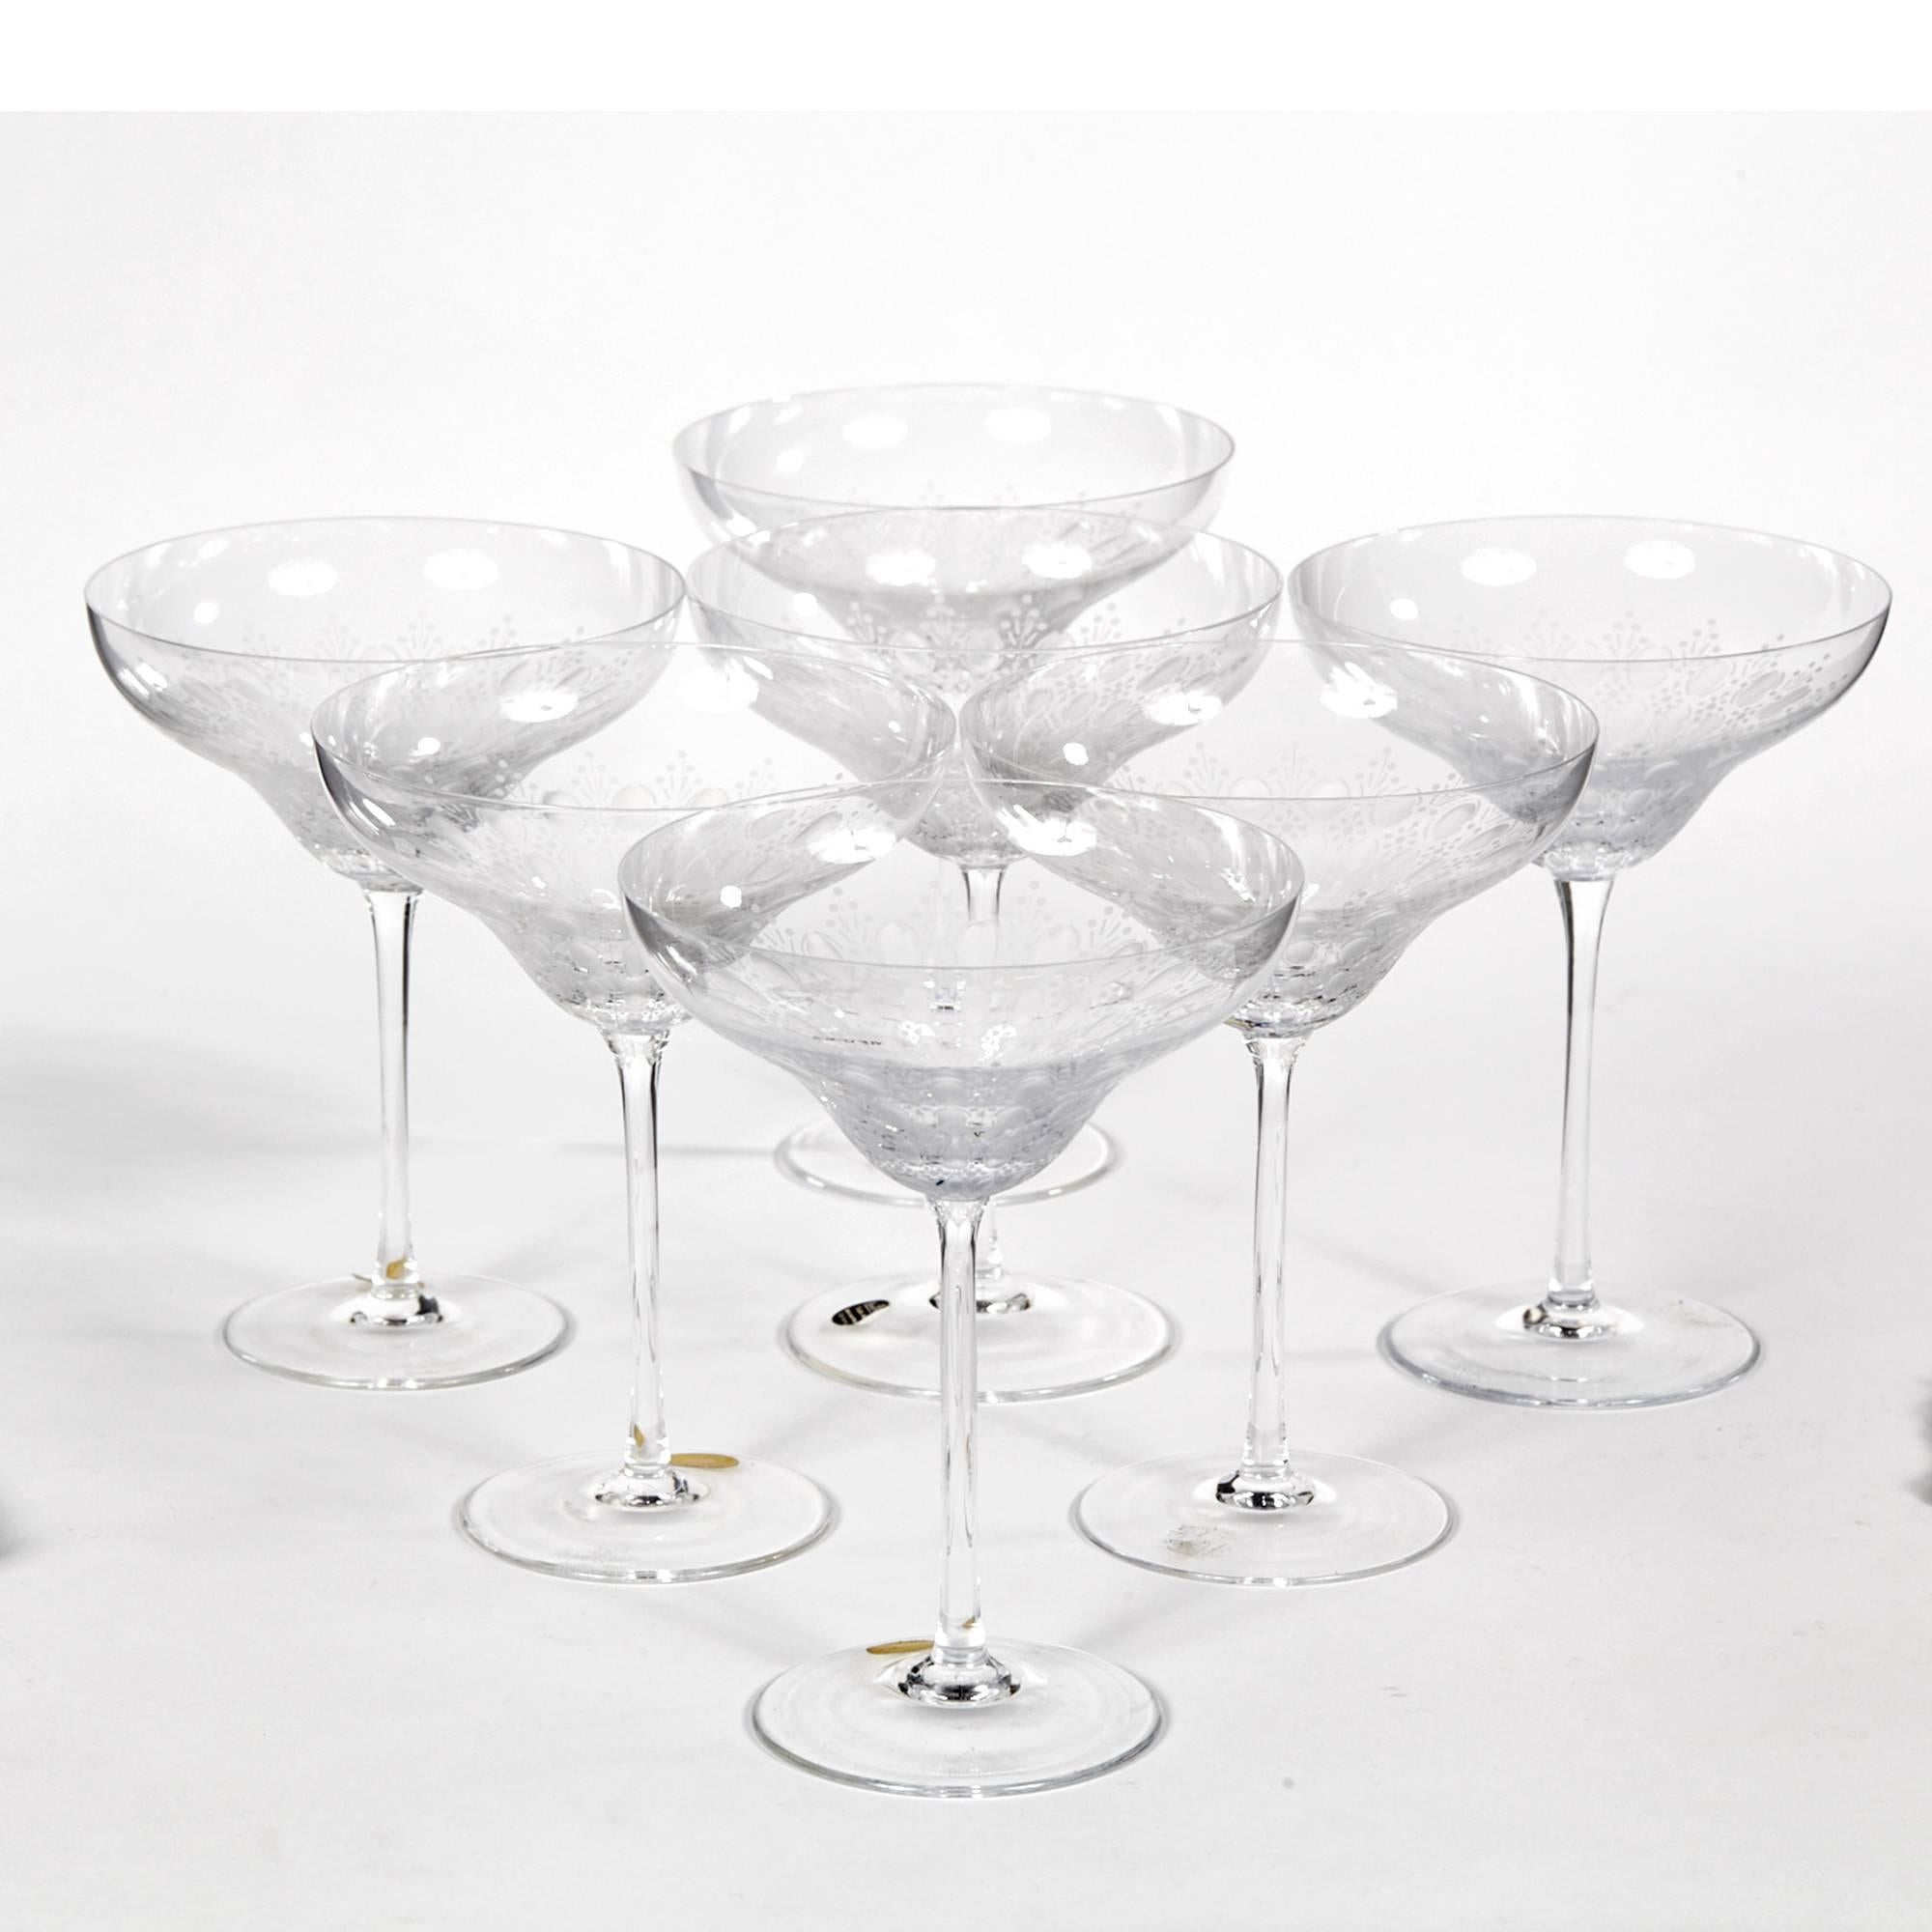 Vintage set of seven delicate glass coupes designed by Bjorn Wiinblad for Rosenthal Studio Line in the Romance II pattern, circa 1960s. Marked.